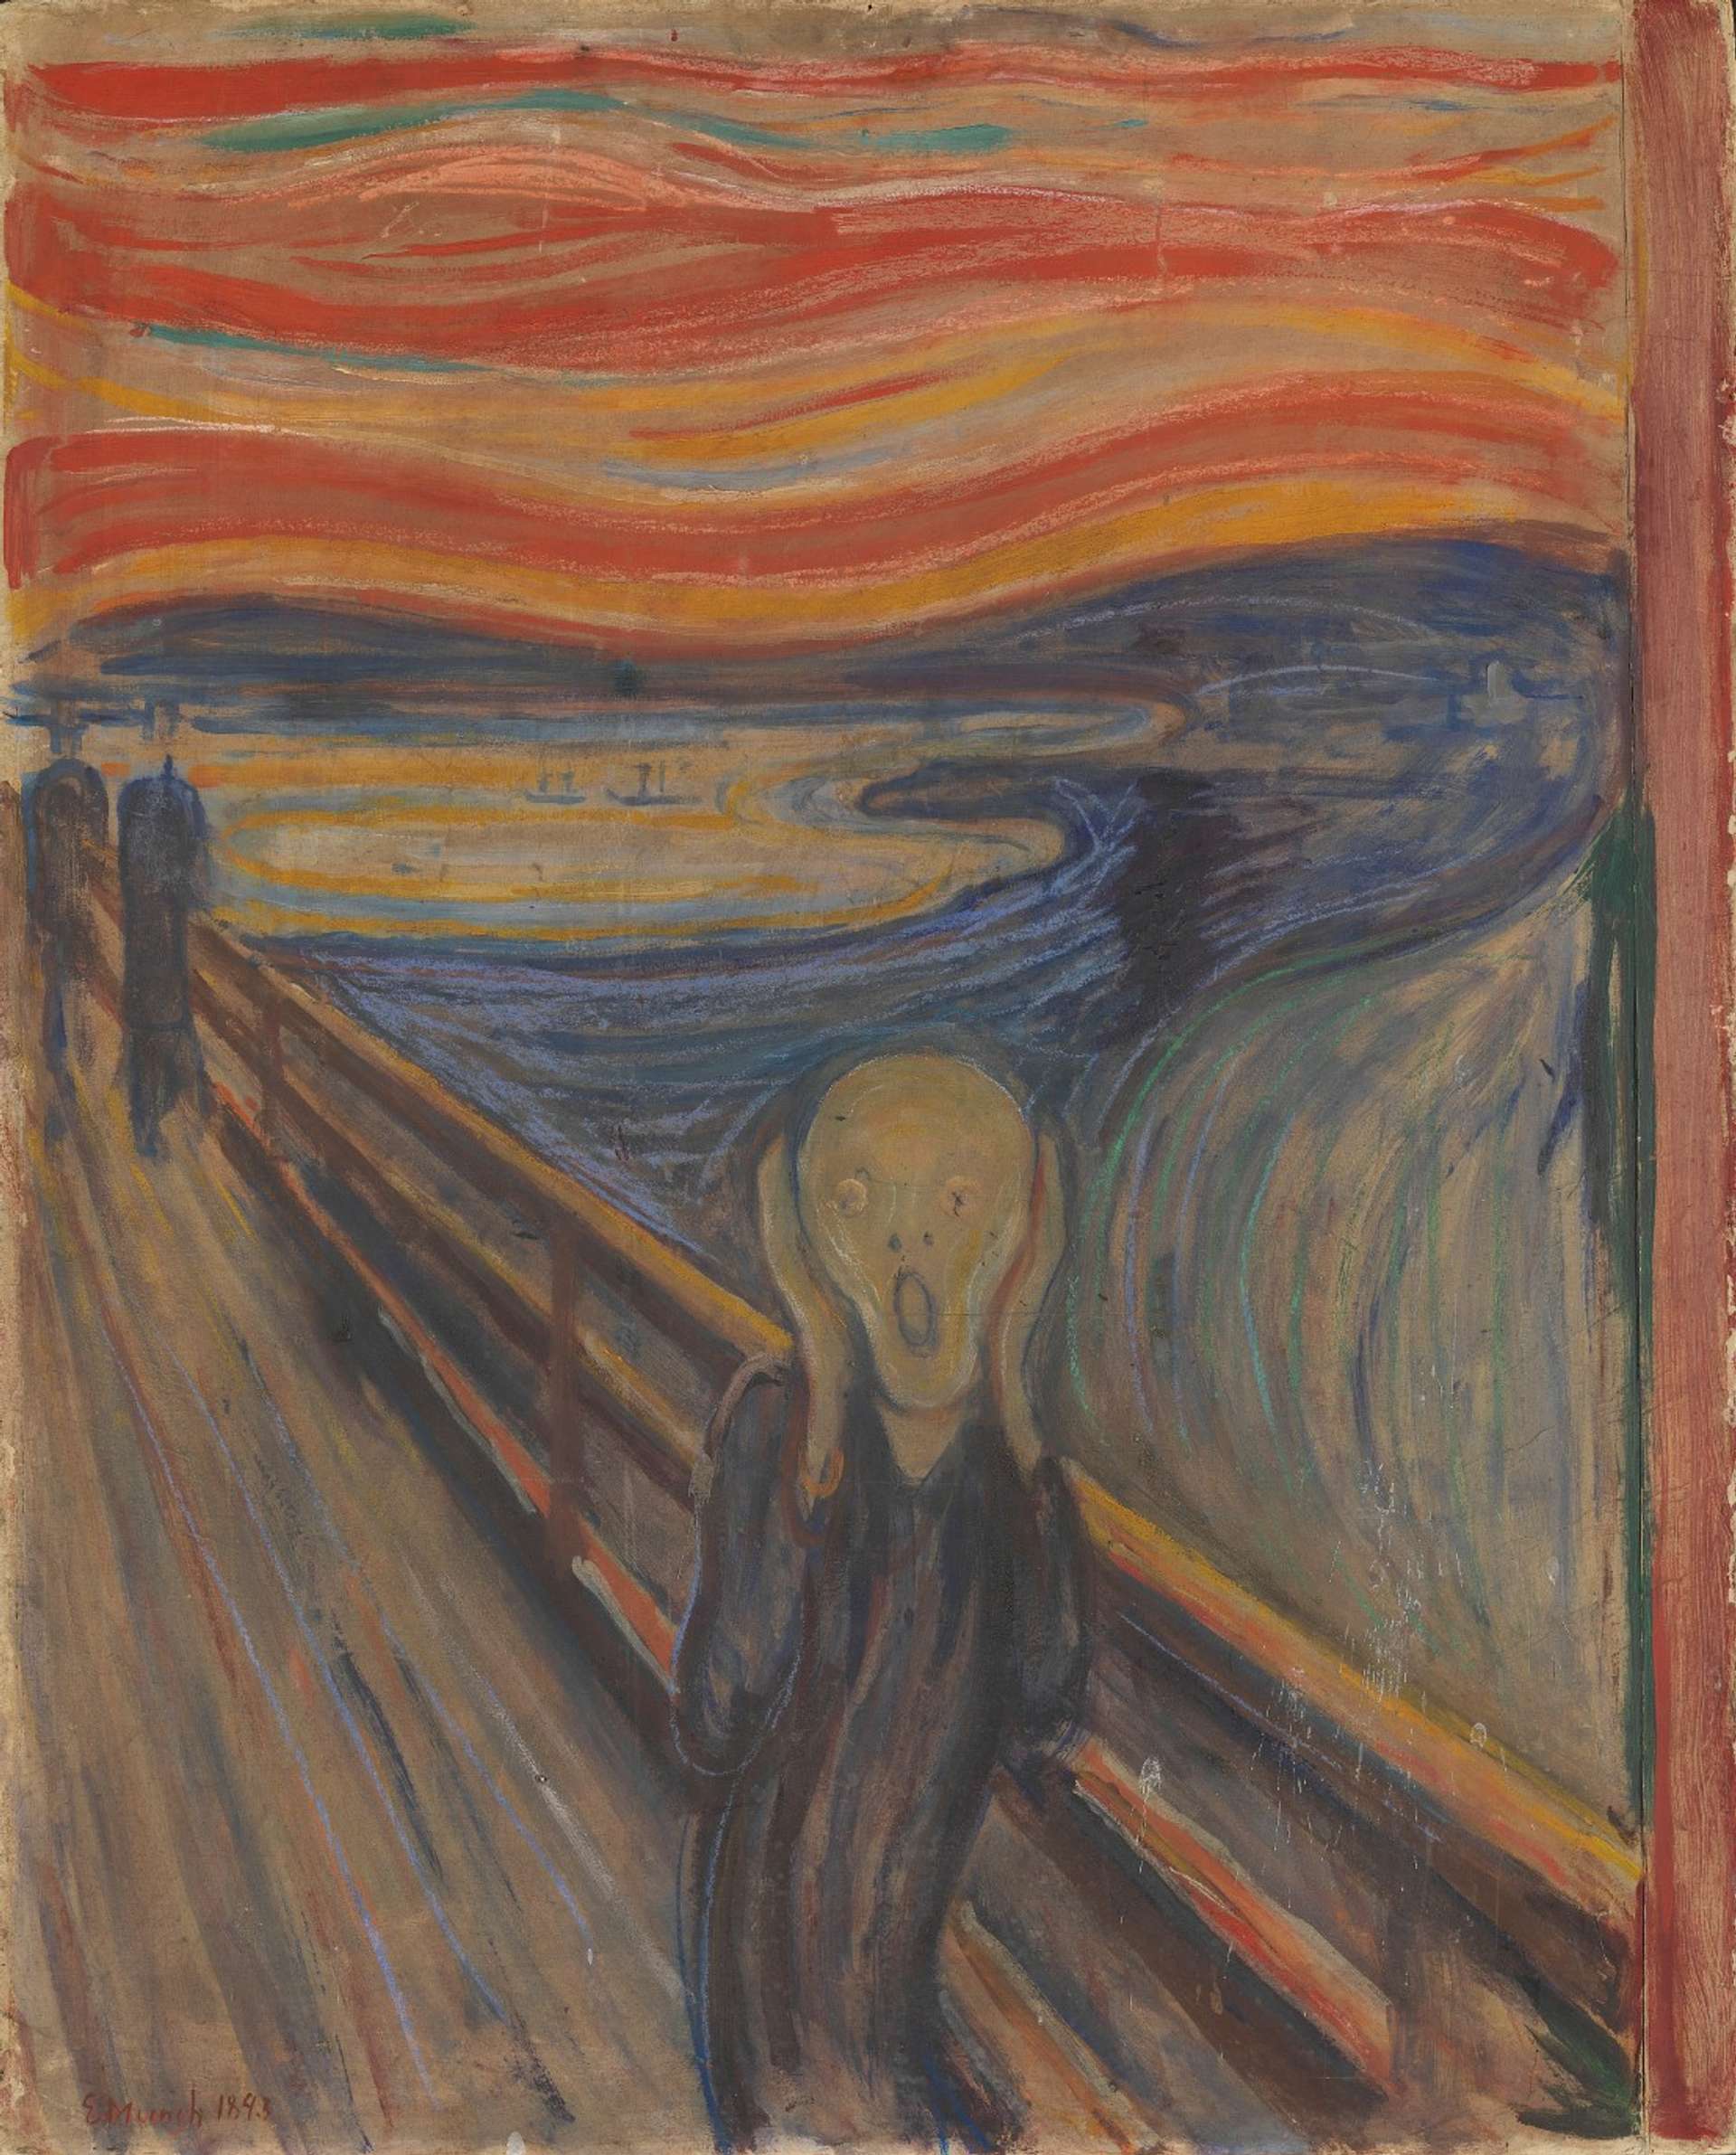 An image of the artwork The Scream by Edvard Munch. It shows a man, distorted, holding his face while displaying an agonised face. He is standing against a bright orange sky.